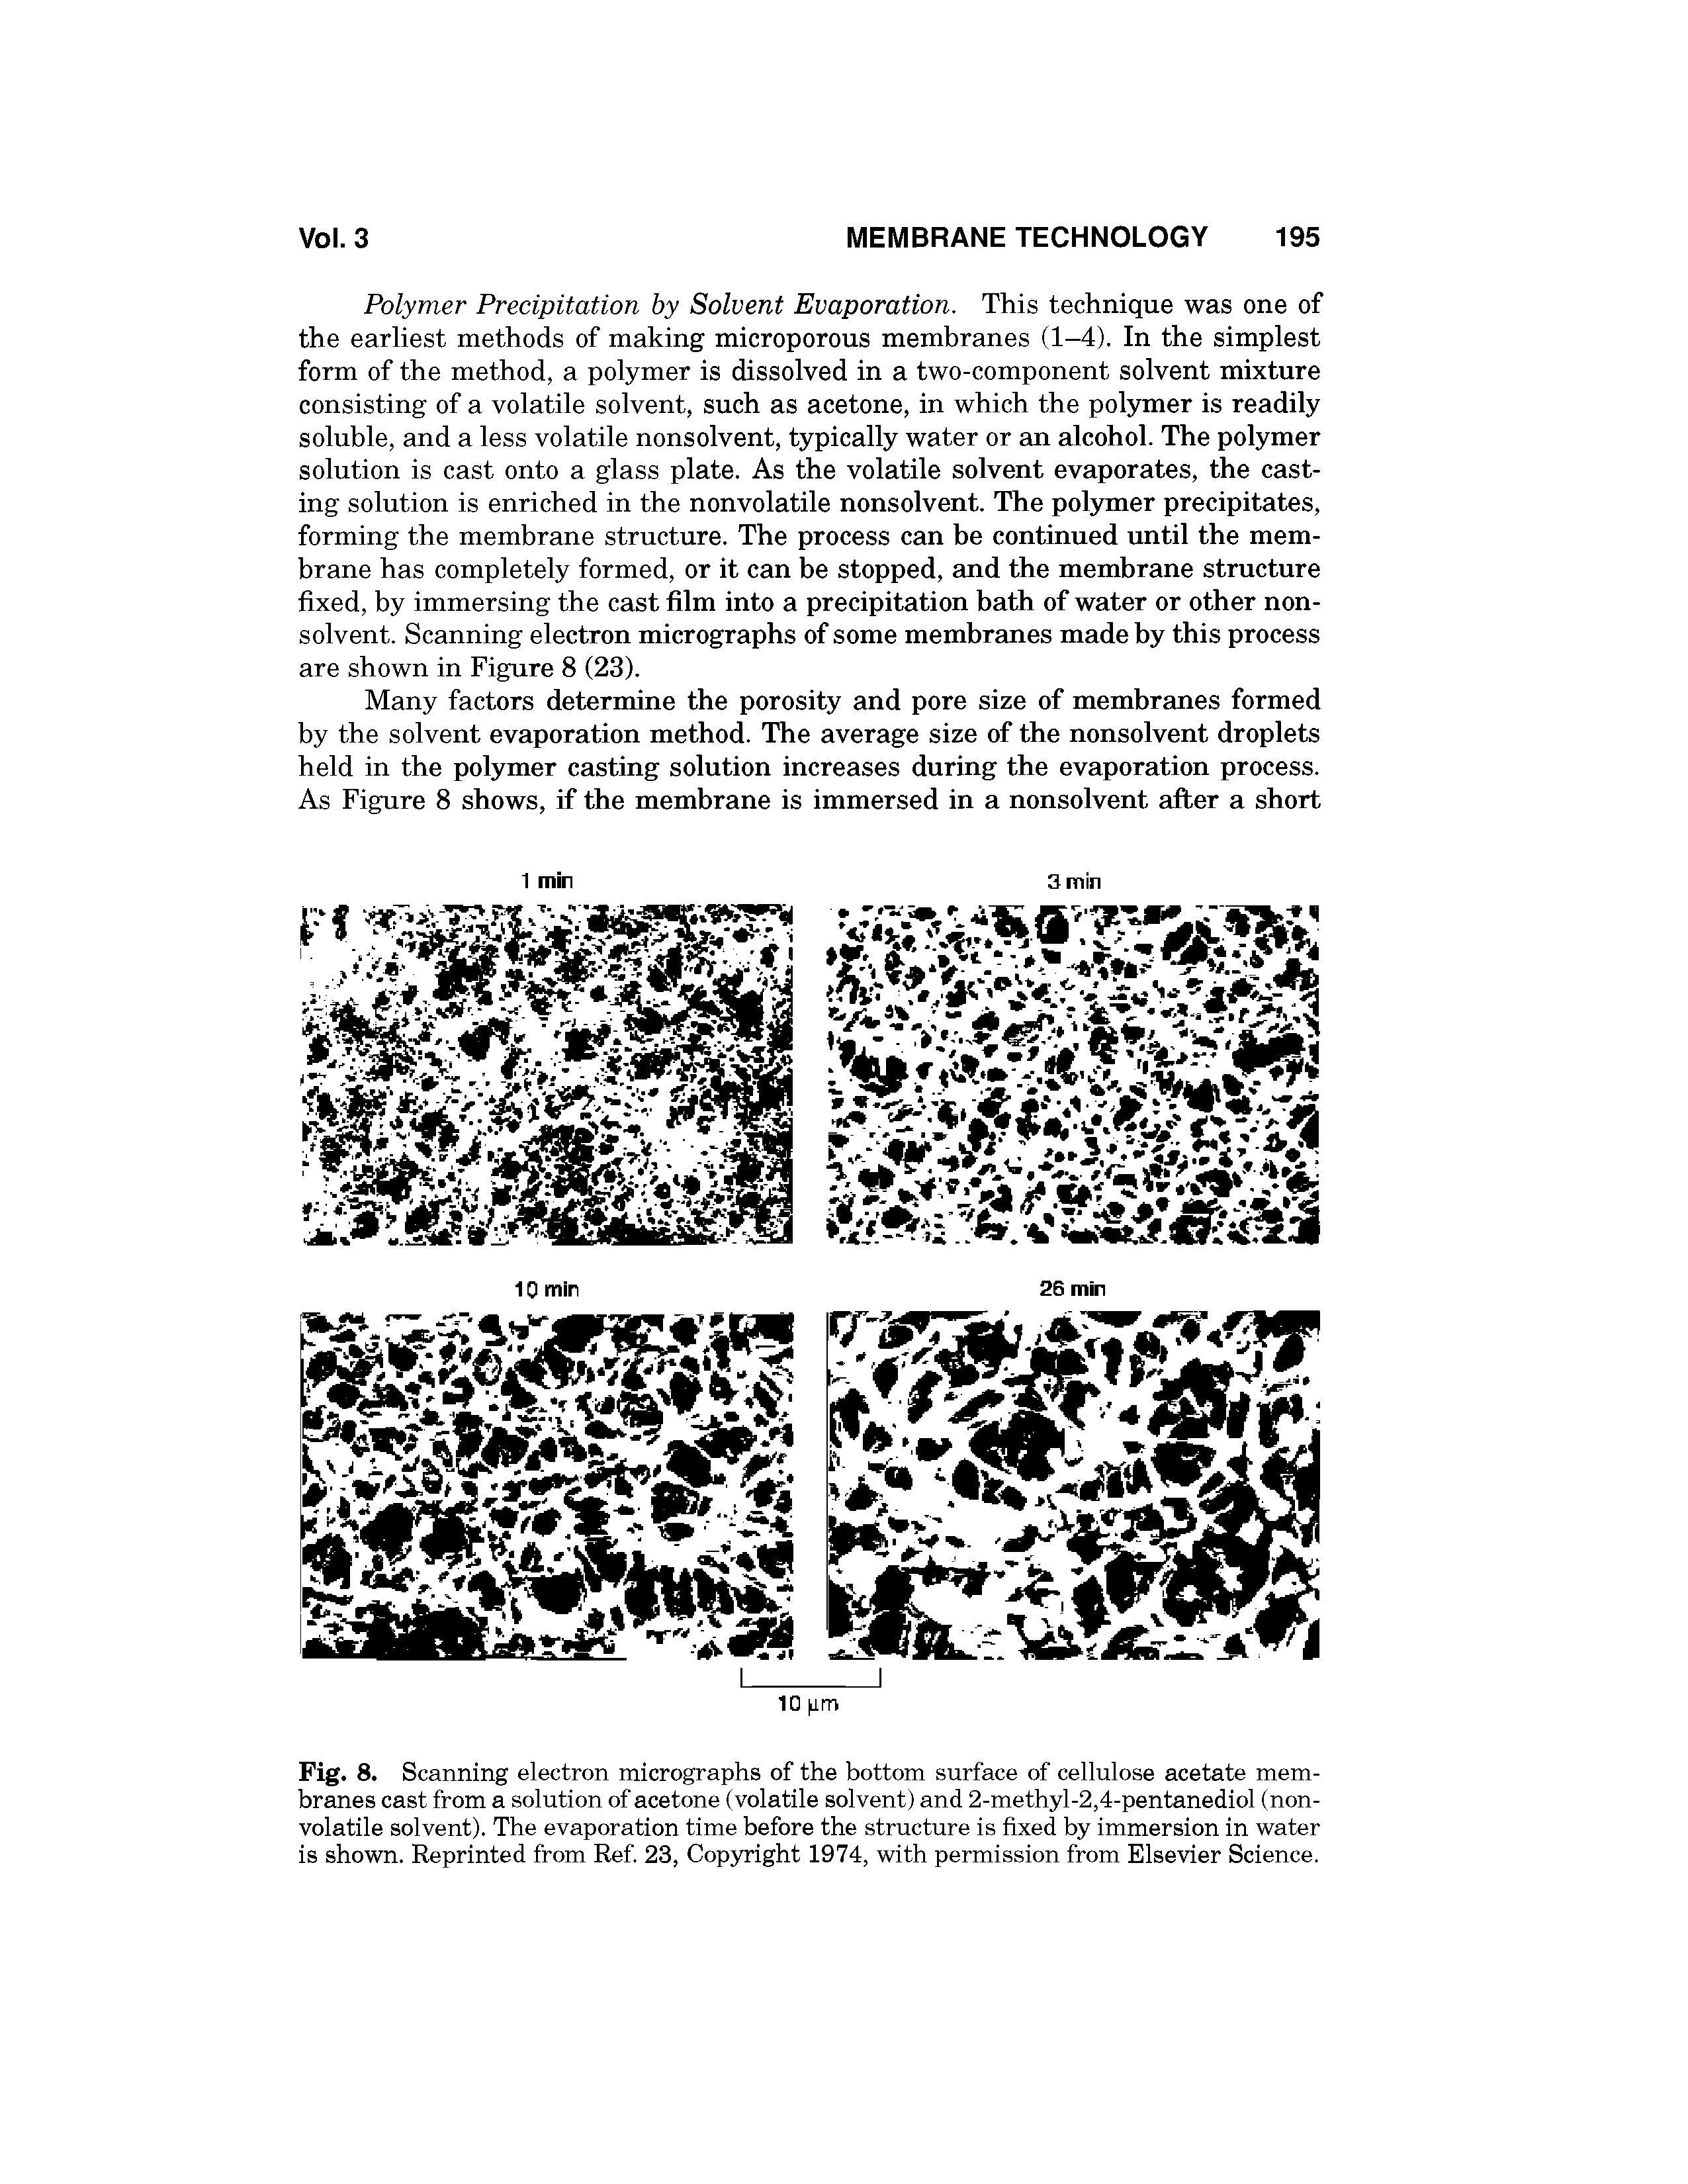 Fig. 8. Scanning electron micrographs of the bottom surface of cellulose acetate membranes cast from a solution of acetone (volatile solvent) and 2-methyl-2,4-pentanediol (nonvolatile solvent). The evaporation time before the structure is fixed by immersion in water is shown. Reprinted from Ref. 23, Cop3Tight 1974, with permission from Elsevier Science.